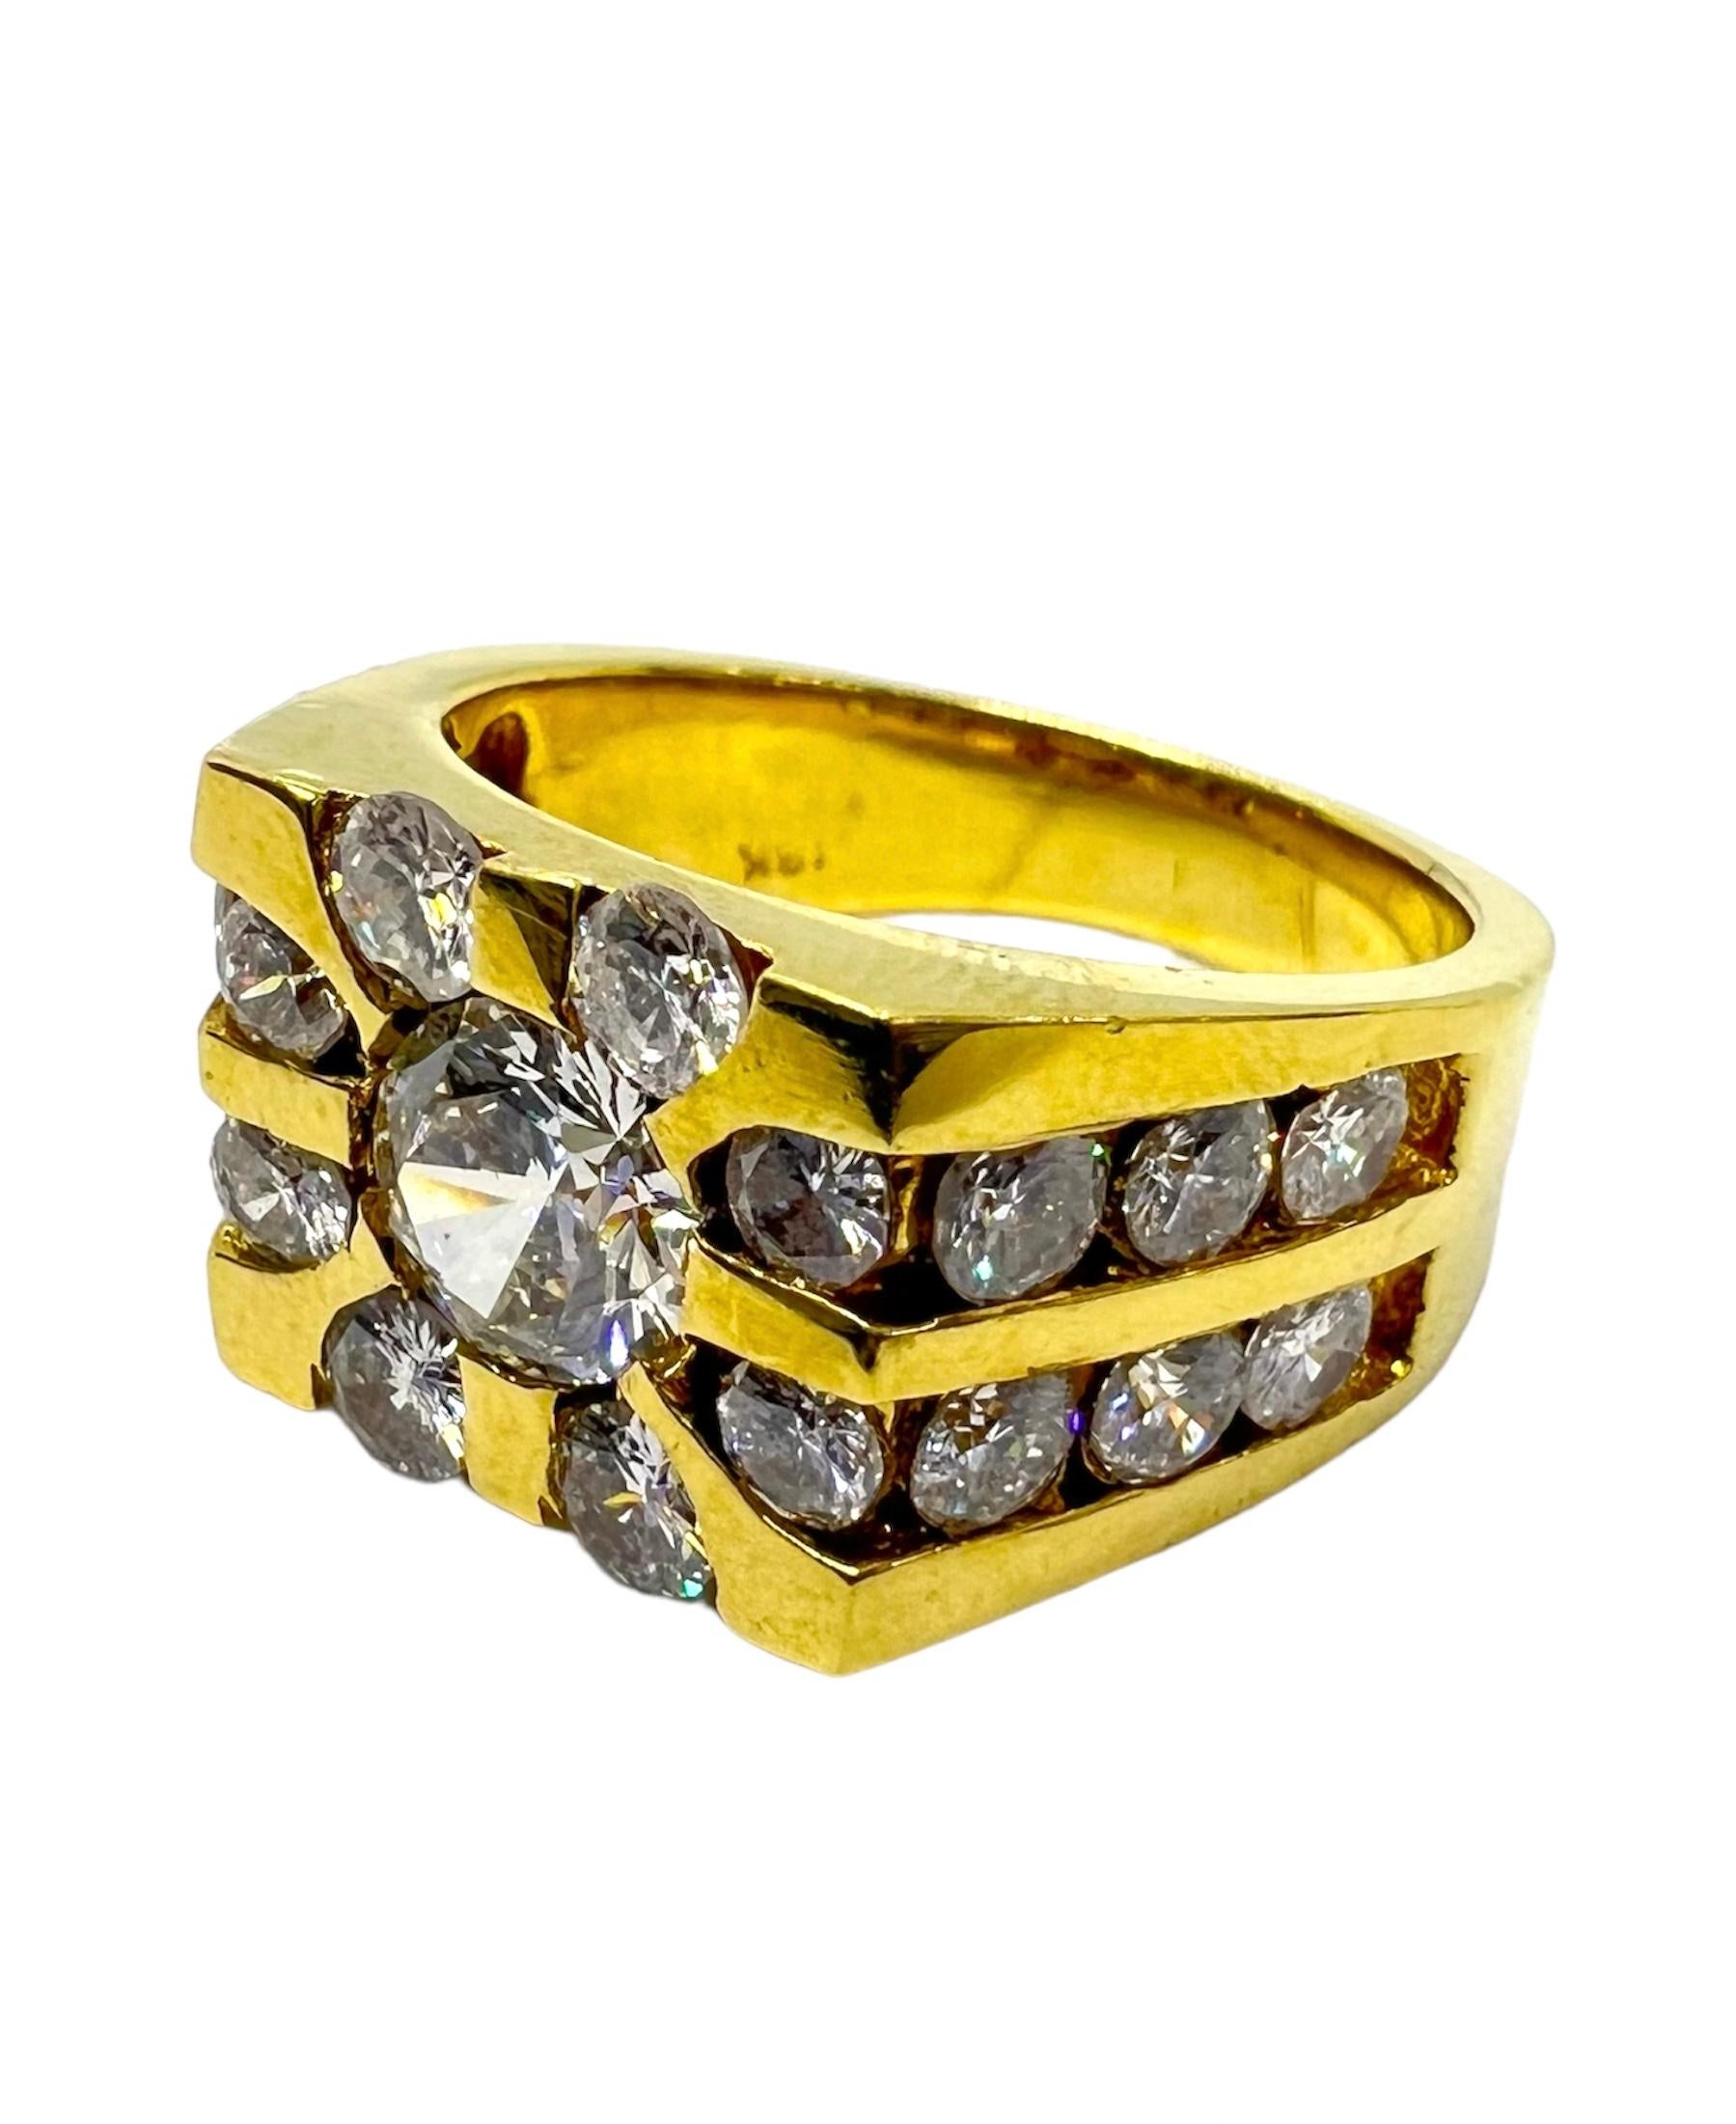 18K yellow gold dome ring with center round diamond accentuated with small round diamonds.

Sophia D by Joseph Dardashti LTD has been known worldwide for 35 years and are inspired by classic Art Deco design that merges with modern manufacturing